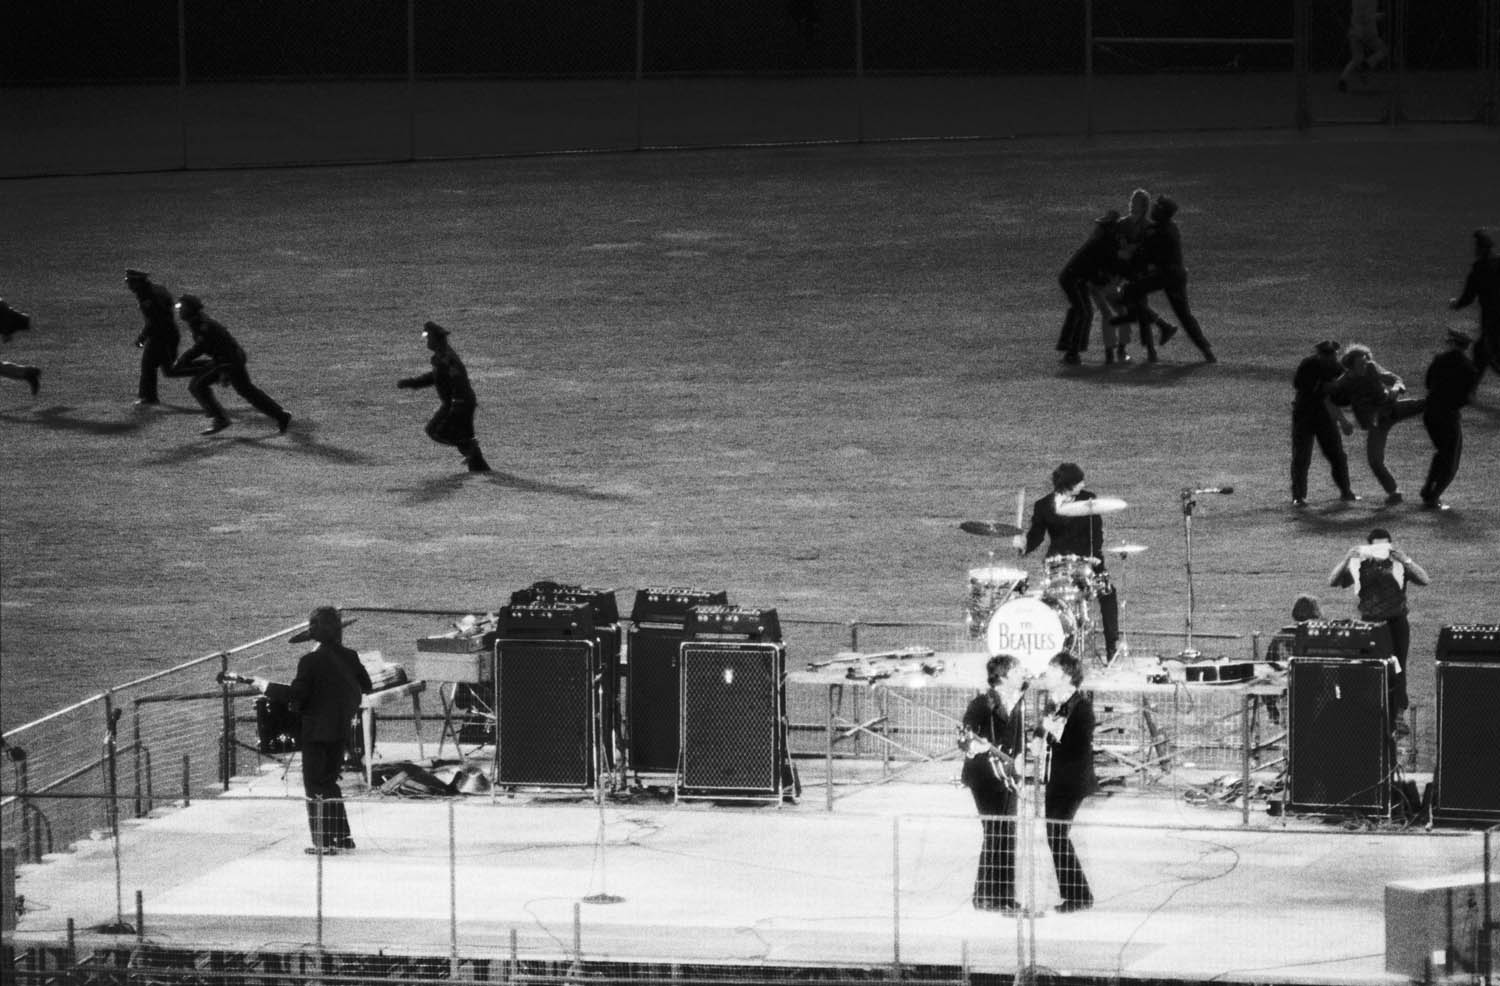 Policemen clear the field of enthusiastic fans as The Beatles perform on a bandstand in Candlestick Park, San Francisco, California, Aug 30, 1966.